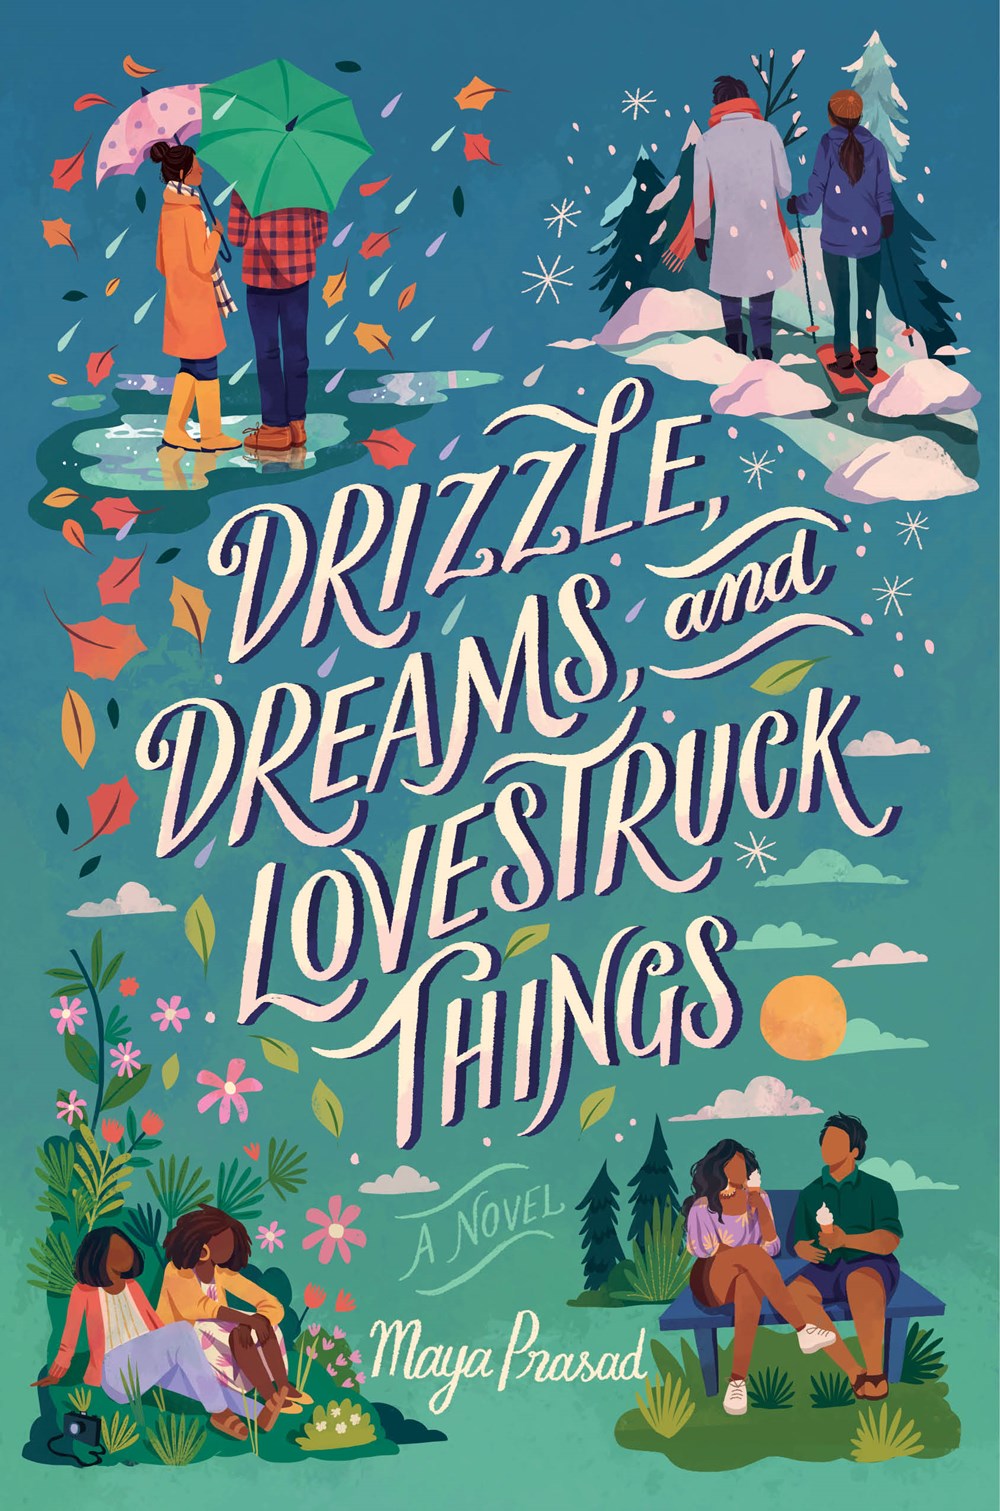 Image for "Drizzle, Dreams, and Lovestruck Things"